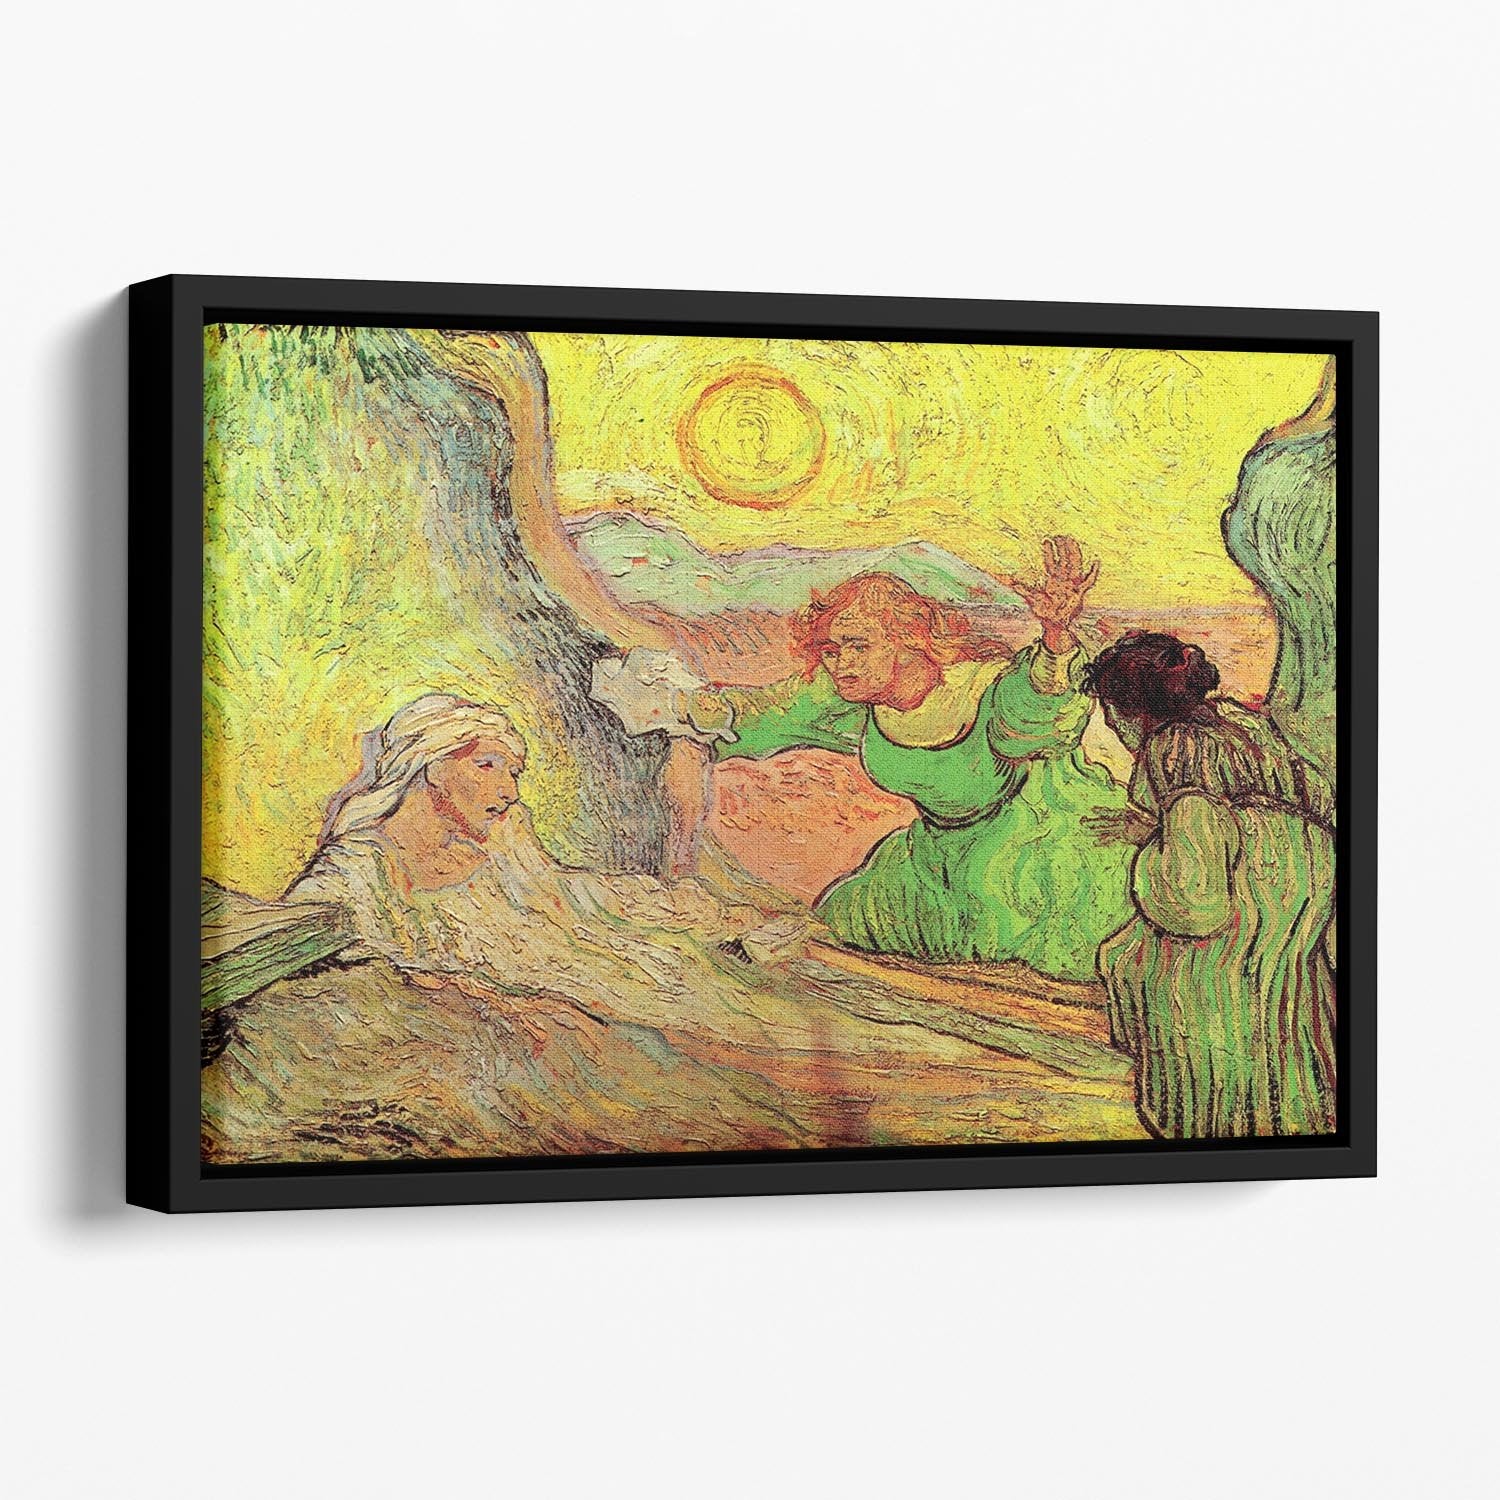 The Raising of Lazarus after Rembrandt by Van Gogh Floating Framed Canvas